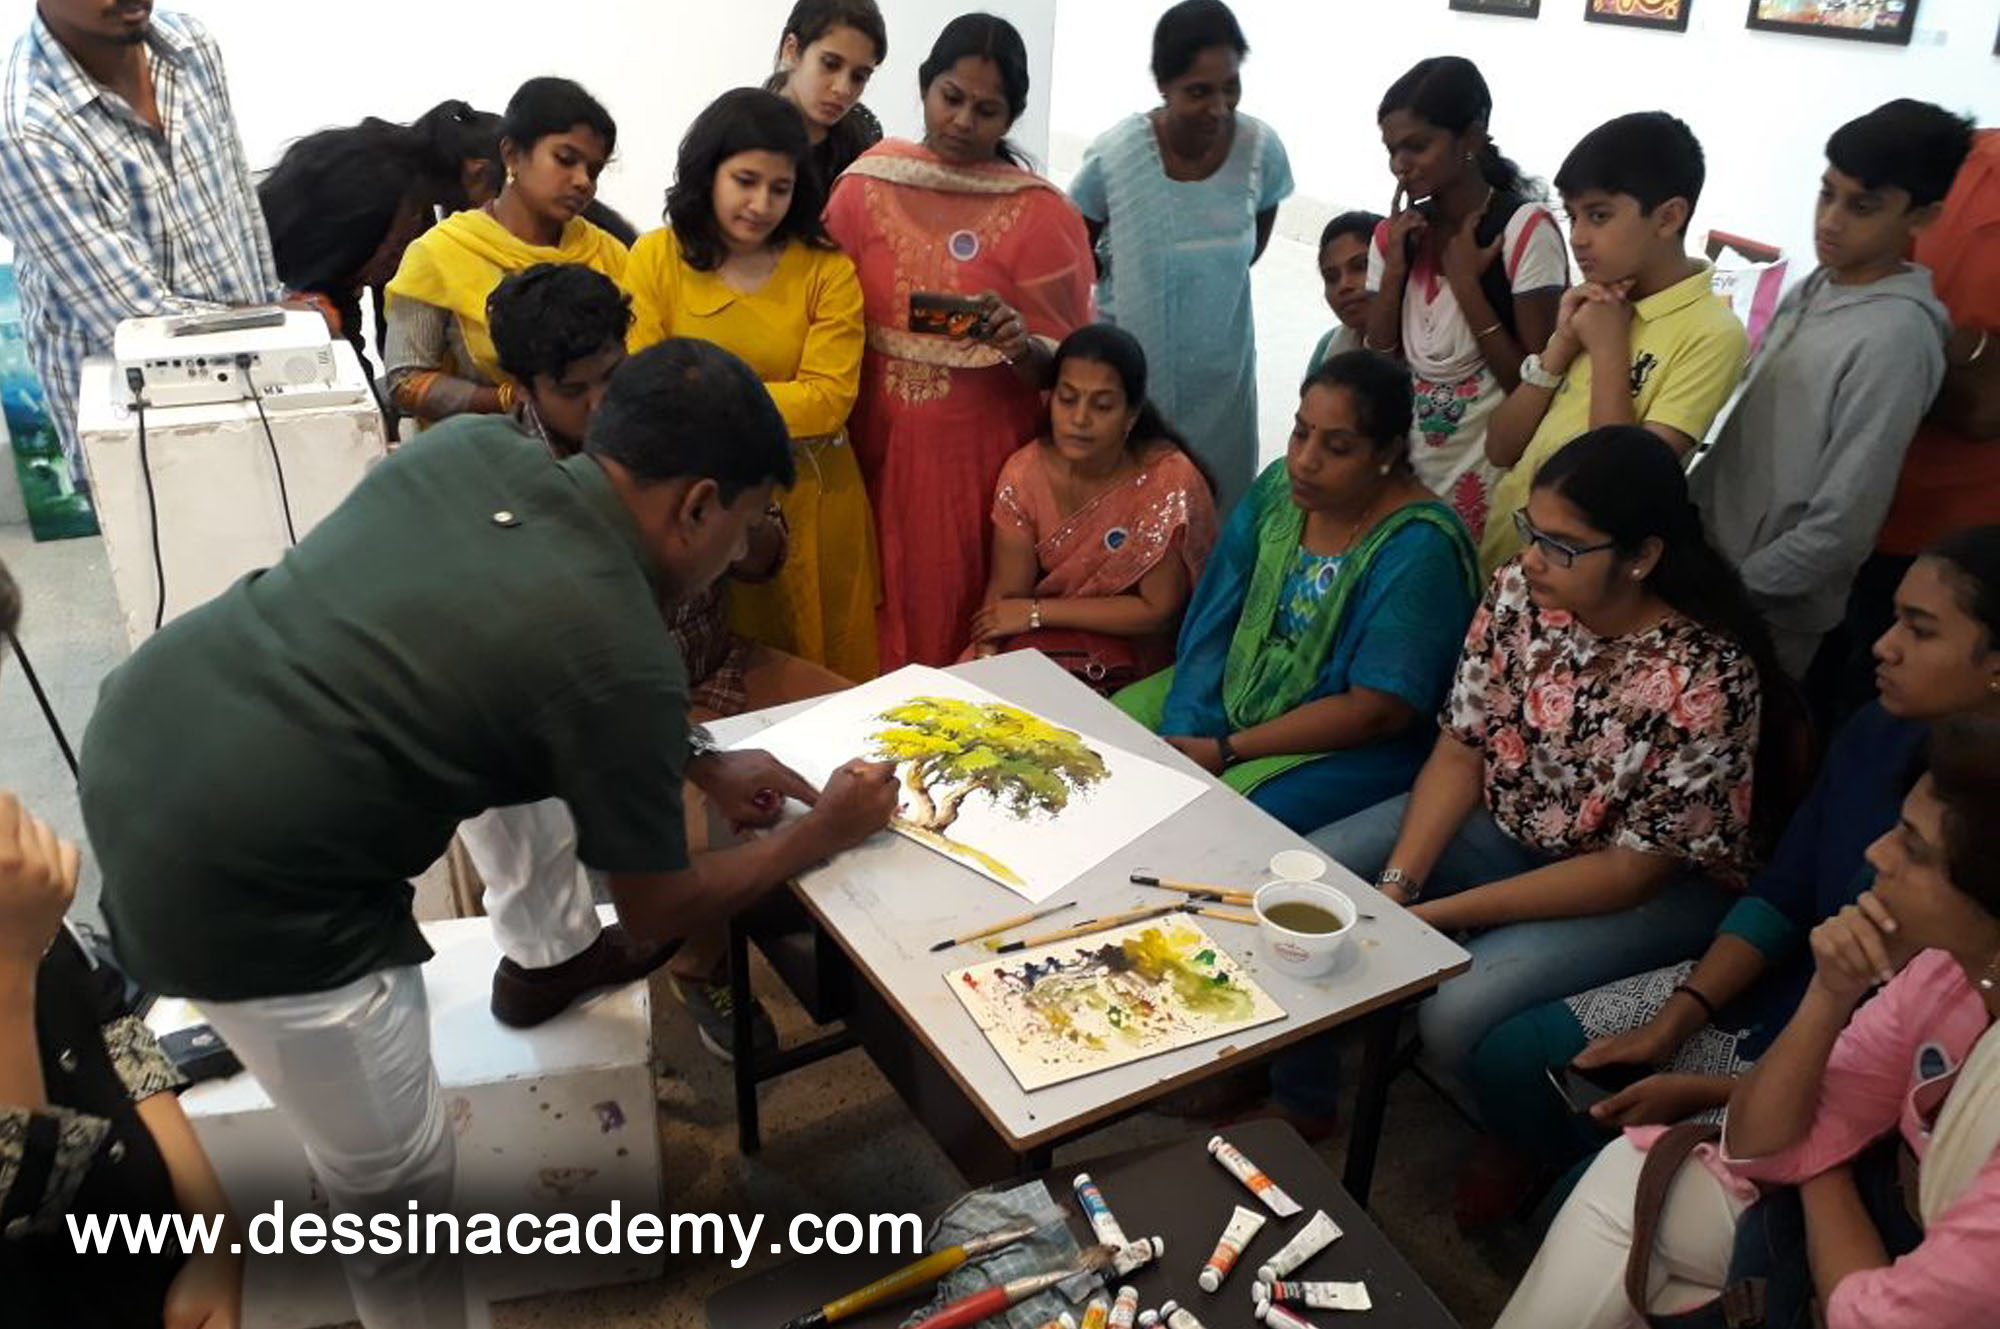 Dessin School of Arts Event Gallery 6, Drawing Coaching in Marine Drive, MumbaiDessin School of Arts